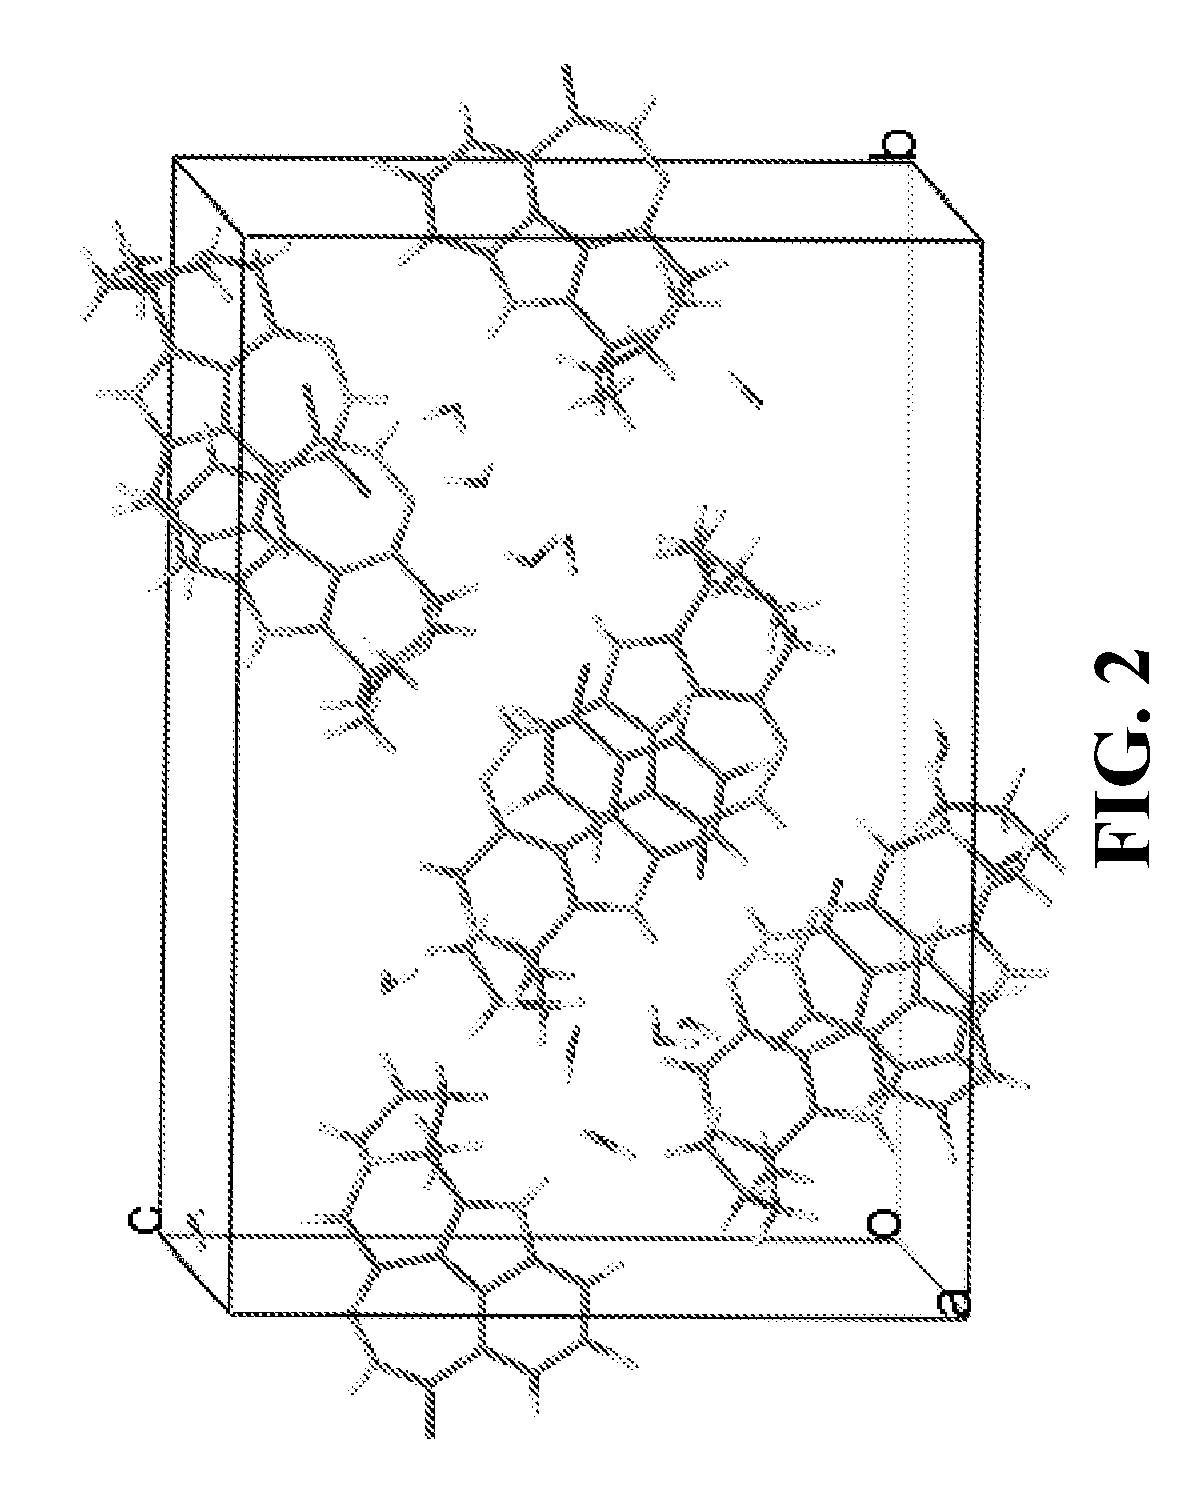 Process for preparing a PARP inhibitor, crystalline forms, and uses thereof